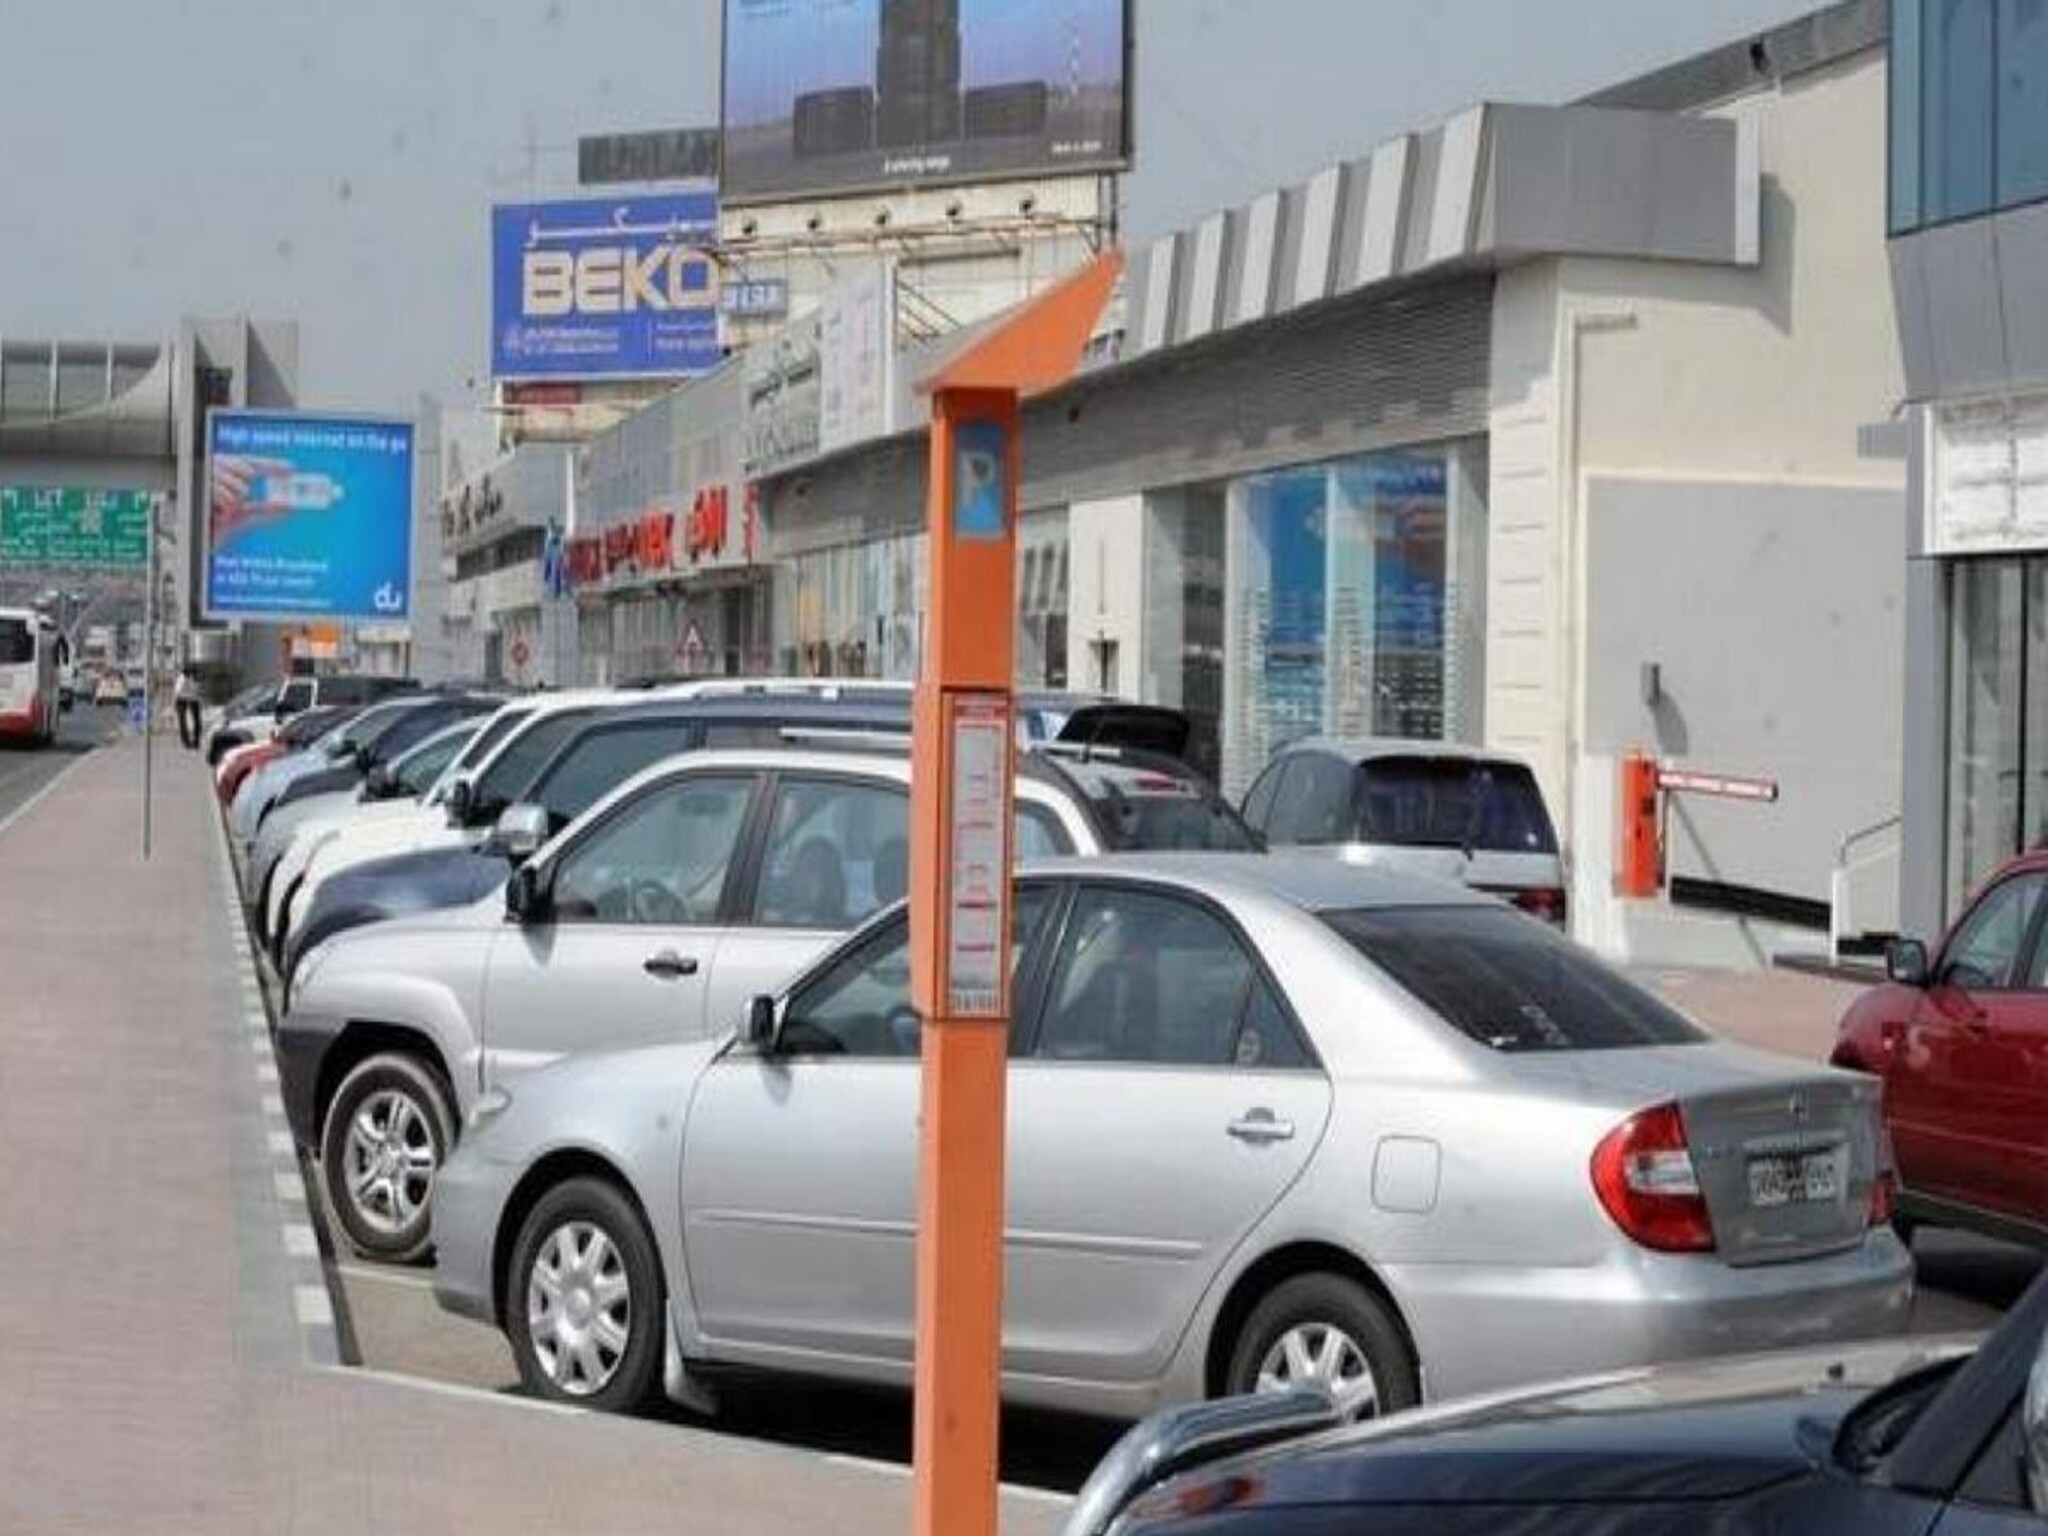 Dubai residents are preparing for parking prices to increase soon